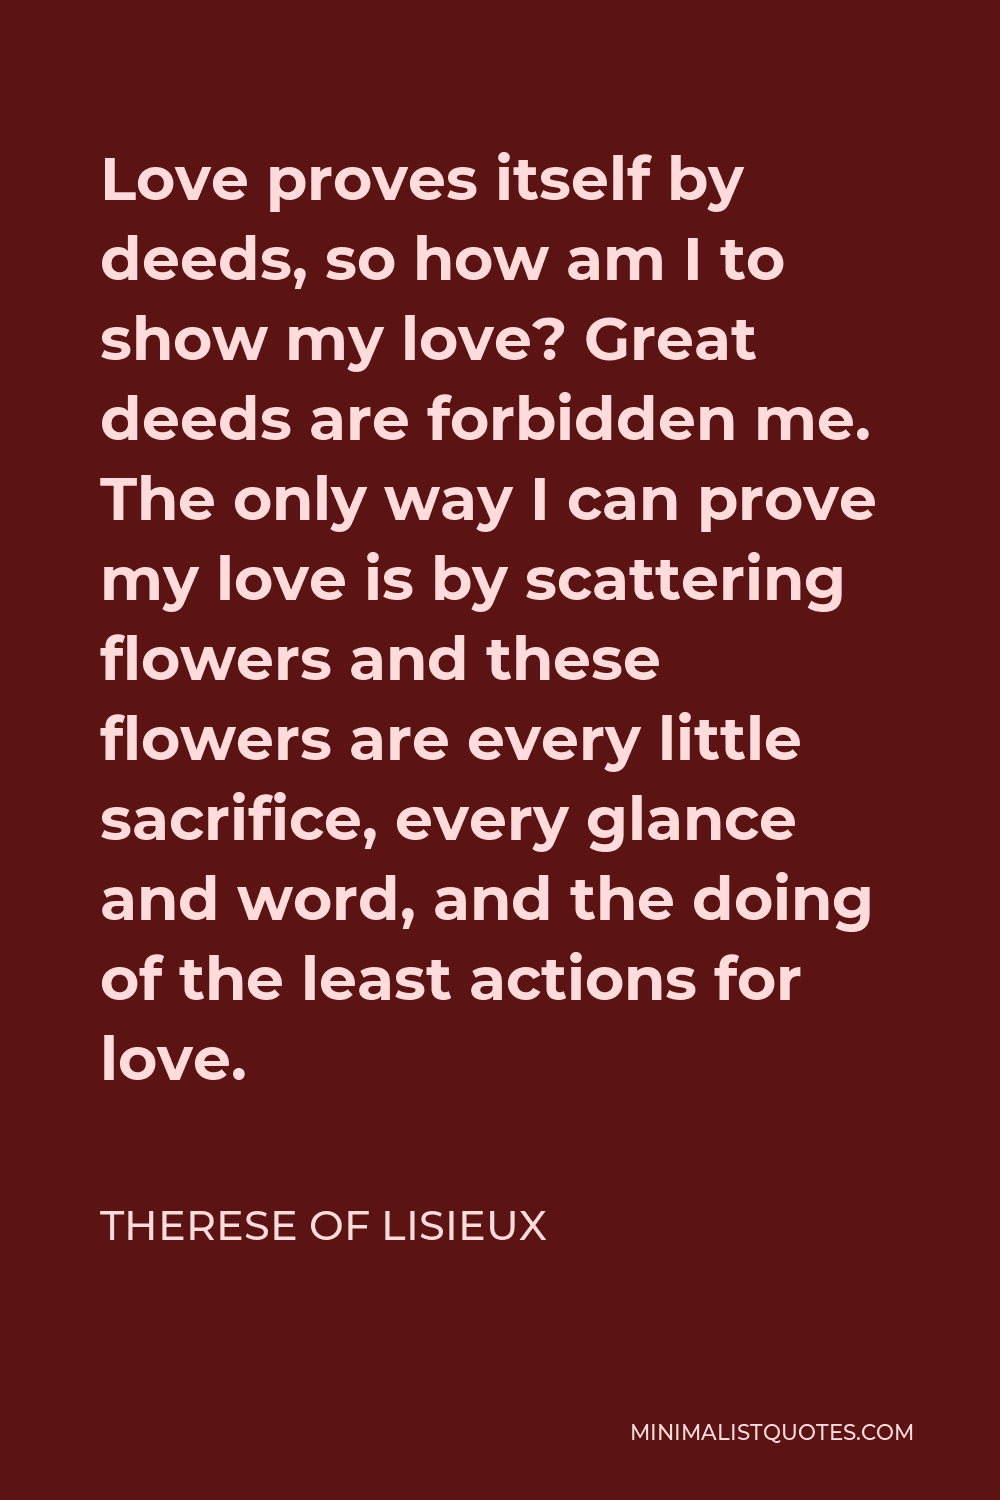 Therese of Lisieux Quote - Love proves itself by deeds, so how am I to show my love? Great deeds are forbidden me. The only way I can prove my love is by scattering flowers and these flowers are every little sacrifice, every glance and word, and the doing of the least actions for love.